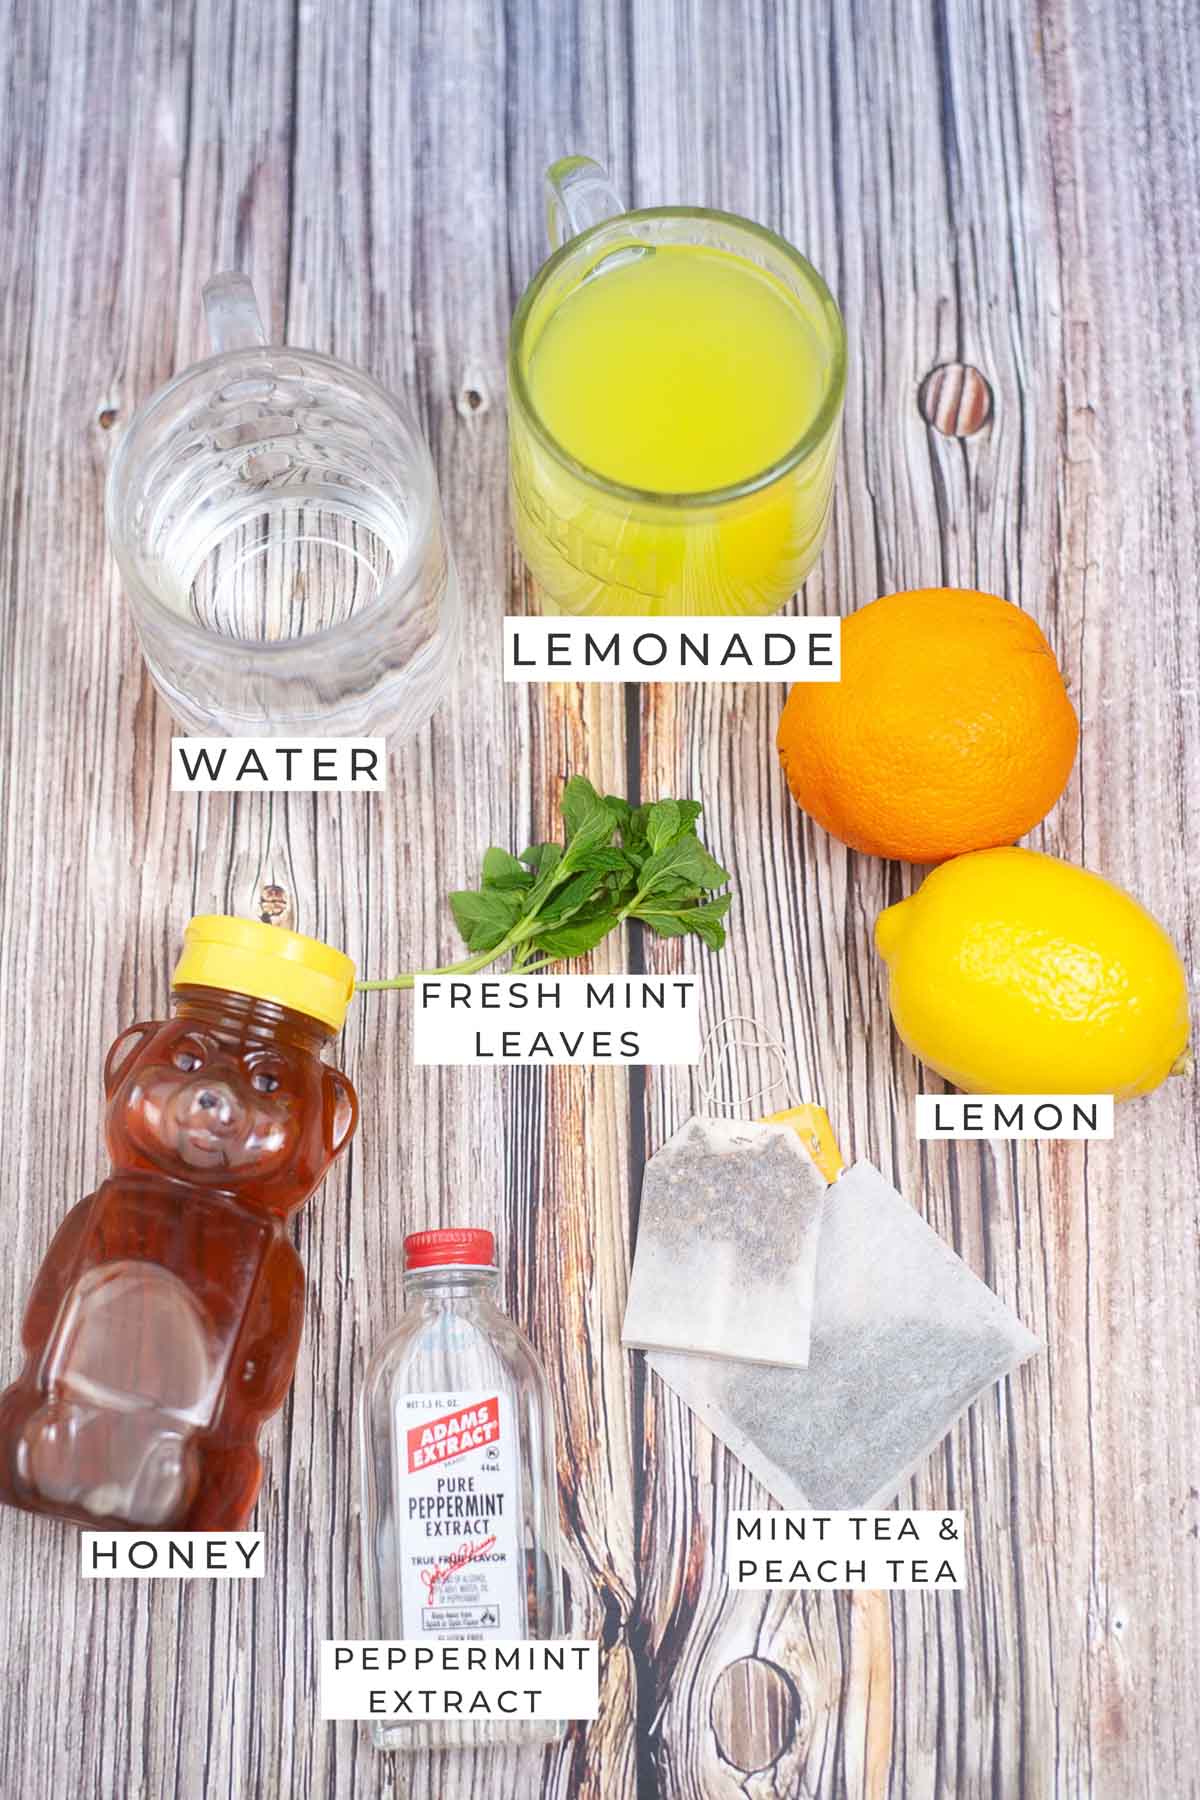 Labeled ingredients for the medicine ball.